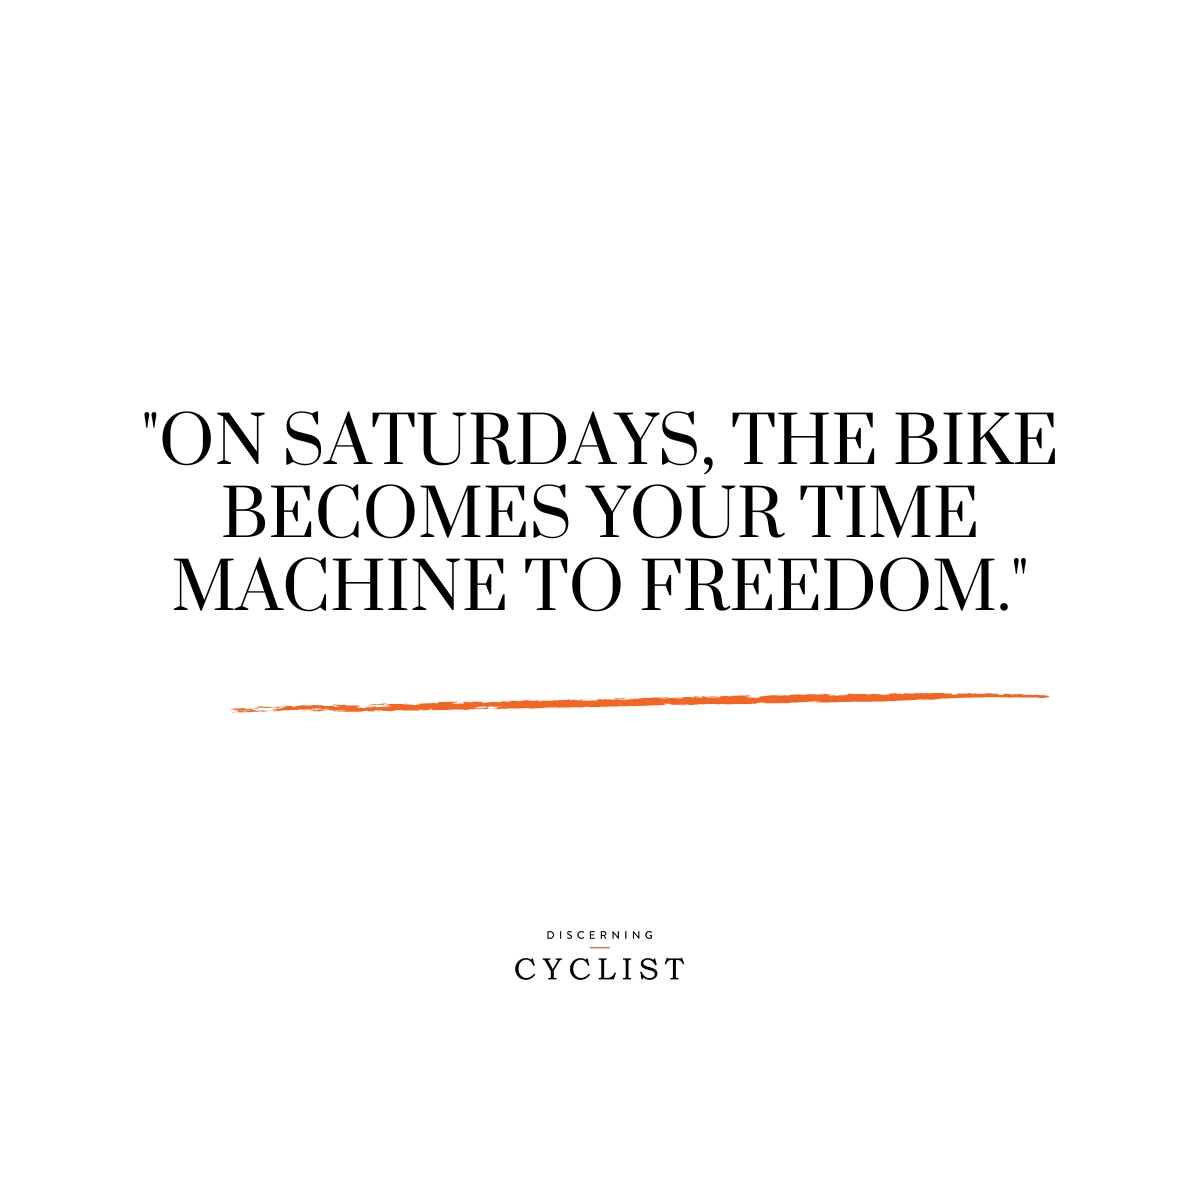 "On Saturdays, the bike becomes your time machine to freedom."